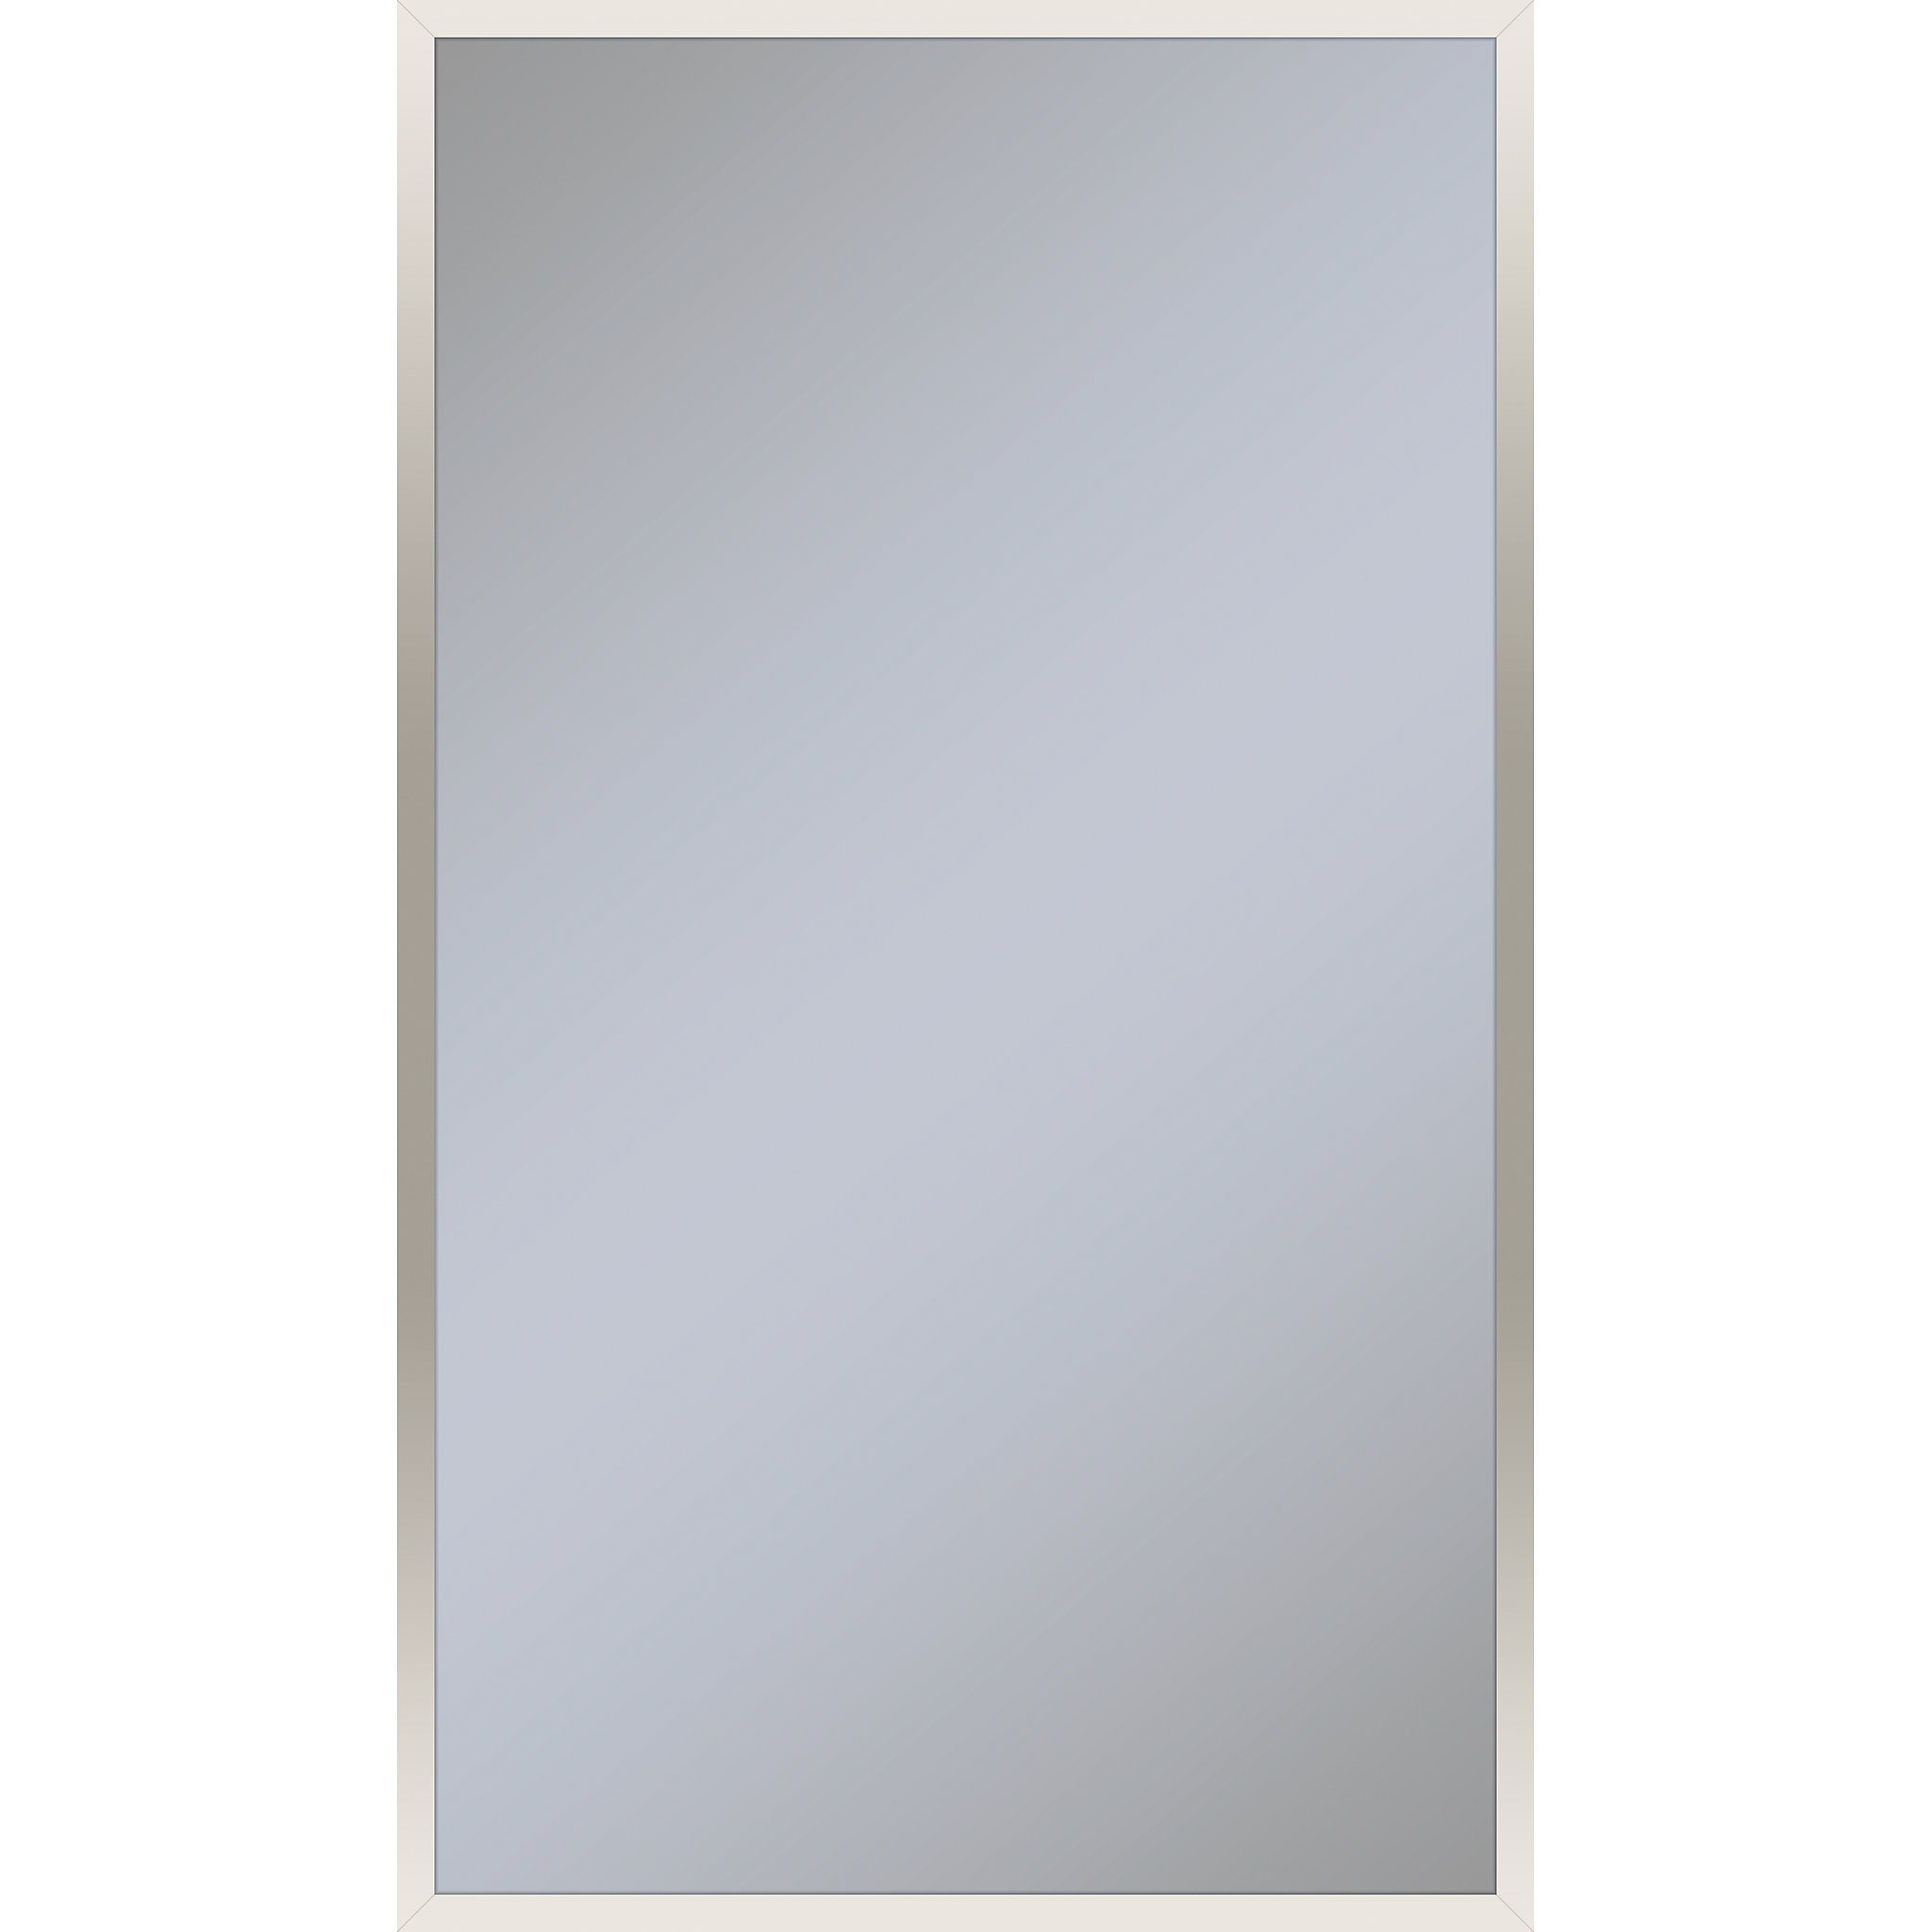 Robern PC2440D4TNN77 Profiles Framed Cabinet, 24" x 40" x 4", Polished Nickel, Non-Electric, Reversible Hinge